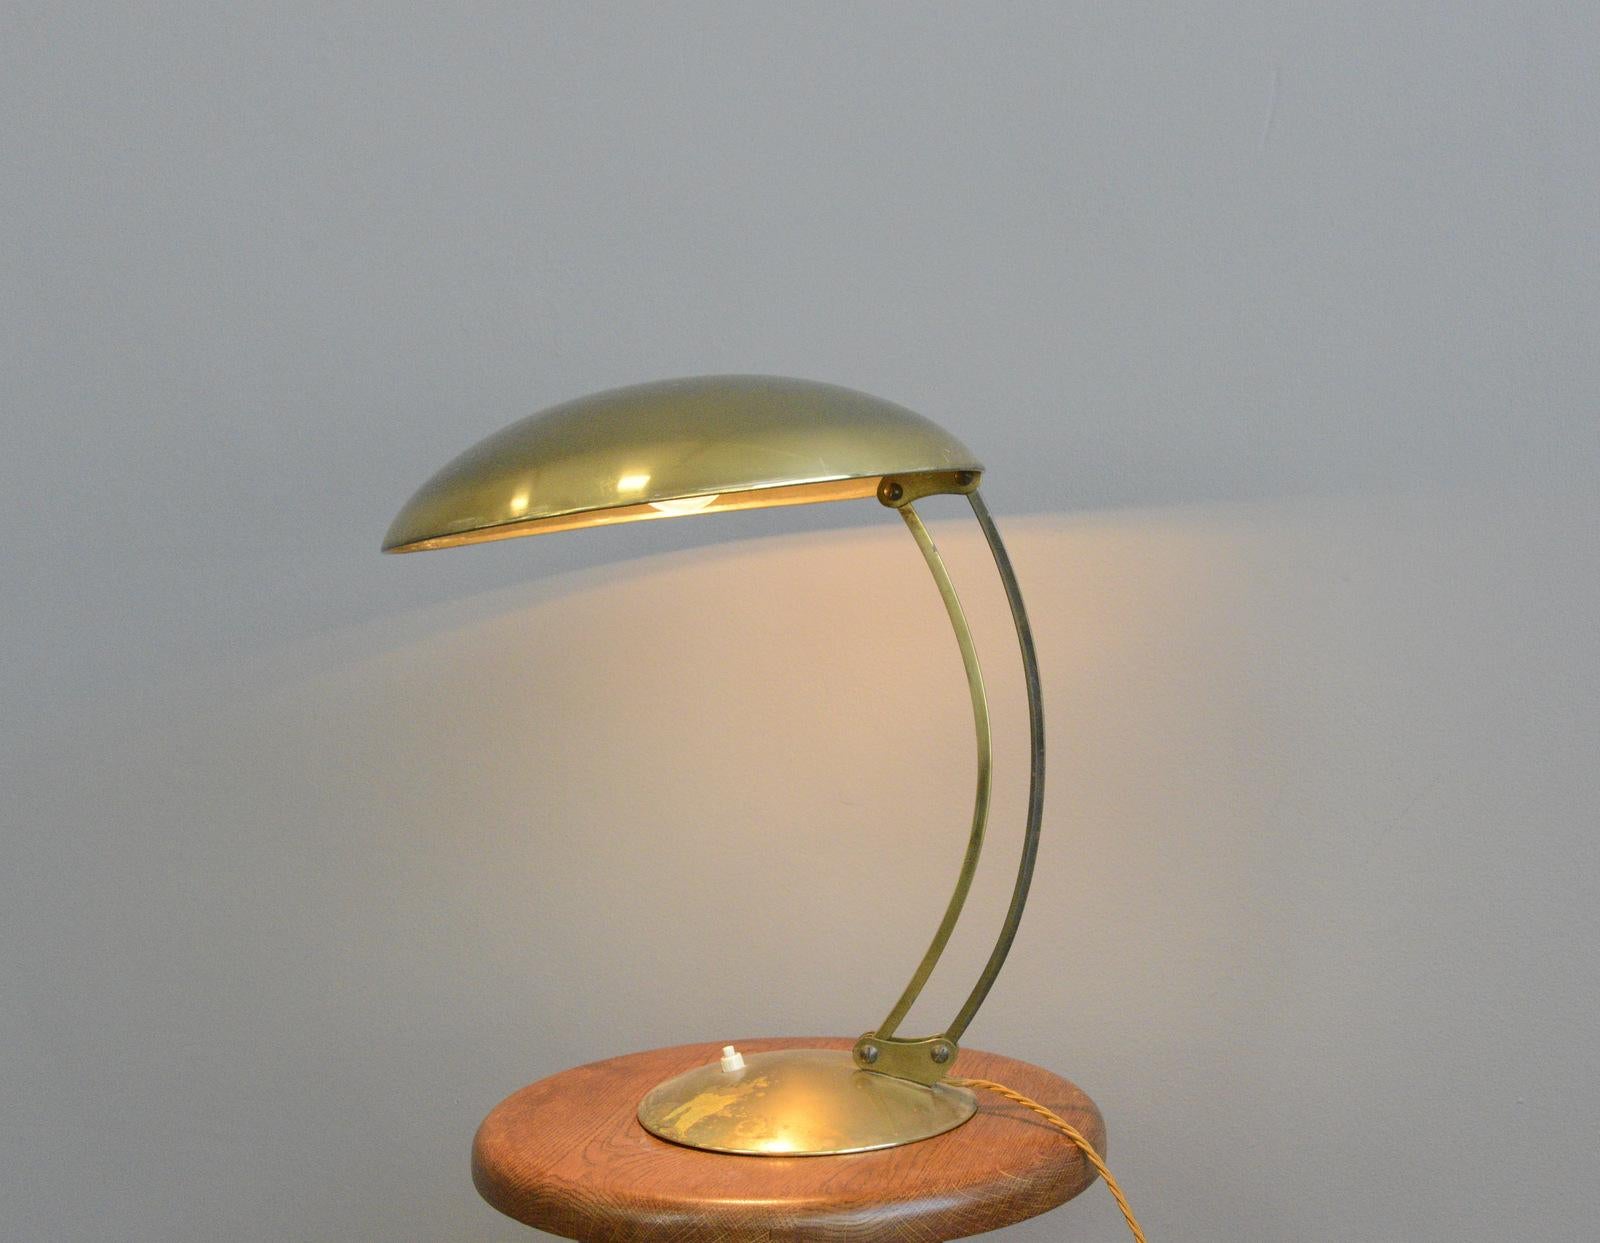 Model 6764 brass table lamp by Kaiser Idell, circa 1940s.

- Solid brass shade and arms
- Brass base with cast iron insert
- Inline switch on the bases
- Adjustable arms
- Designed by Christian Dell for Kaiser Idell
- German, 1940s
-